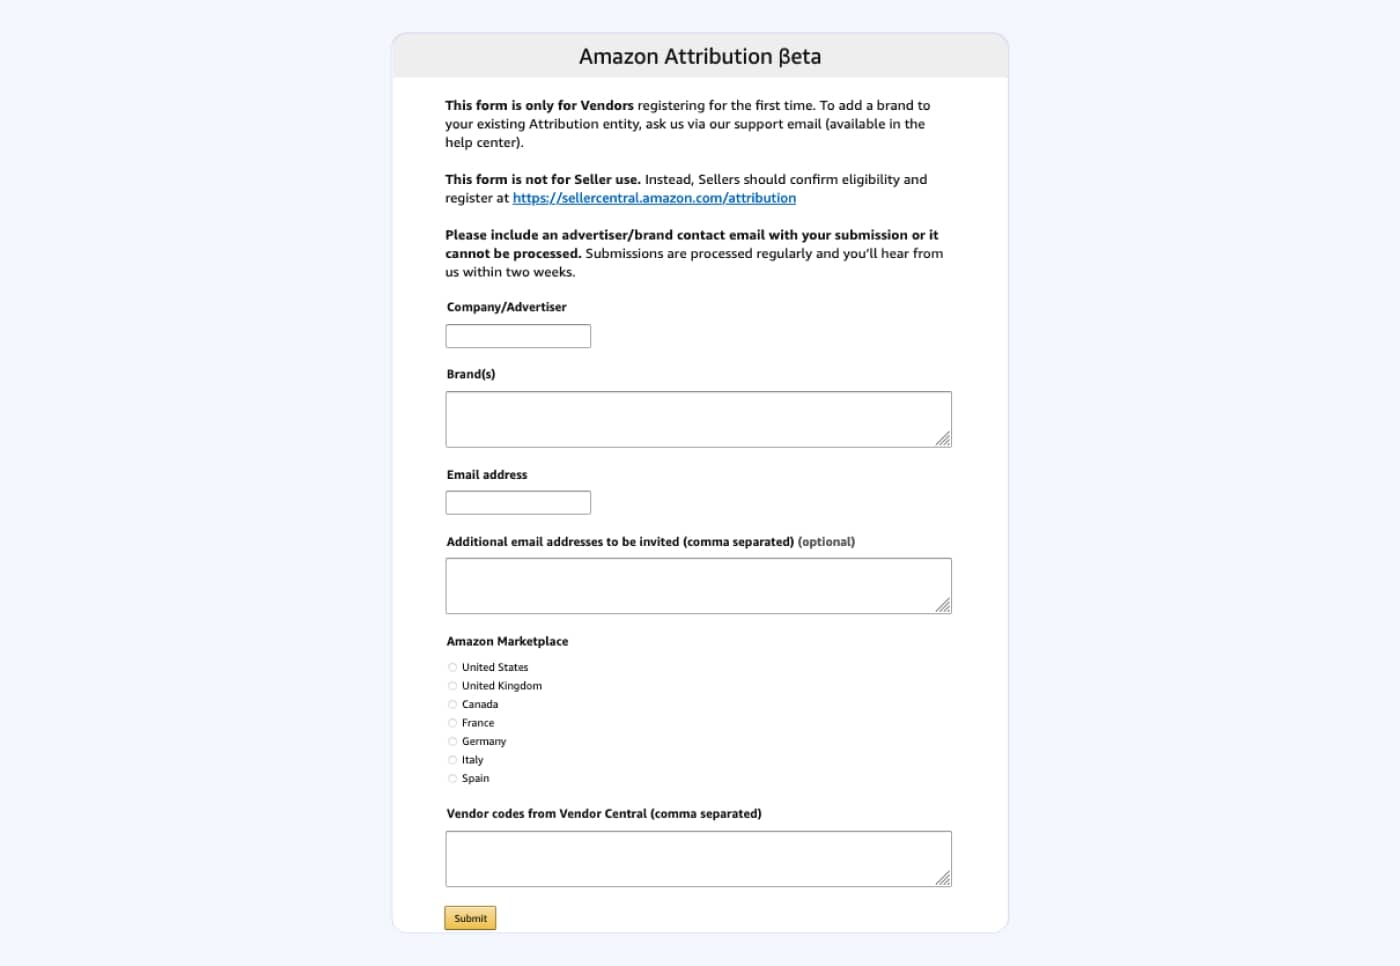 How to Set up Amazon Attribution?